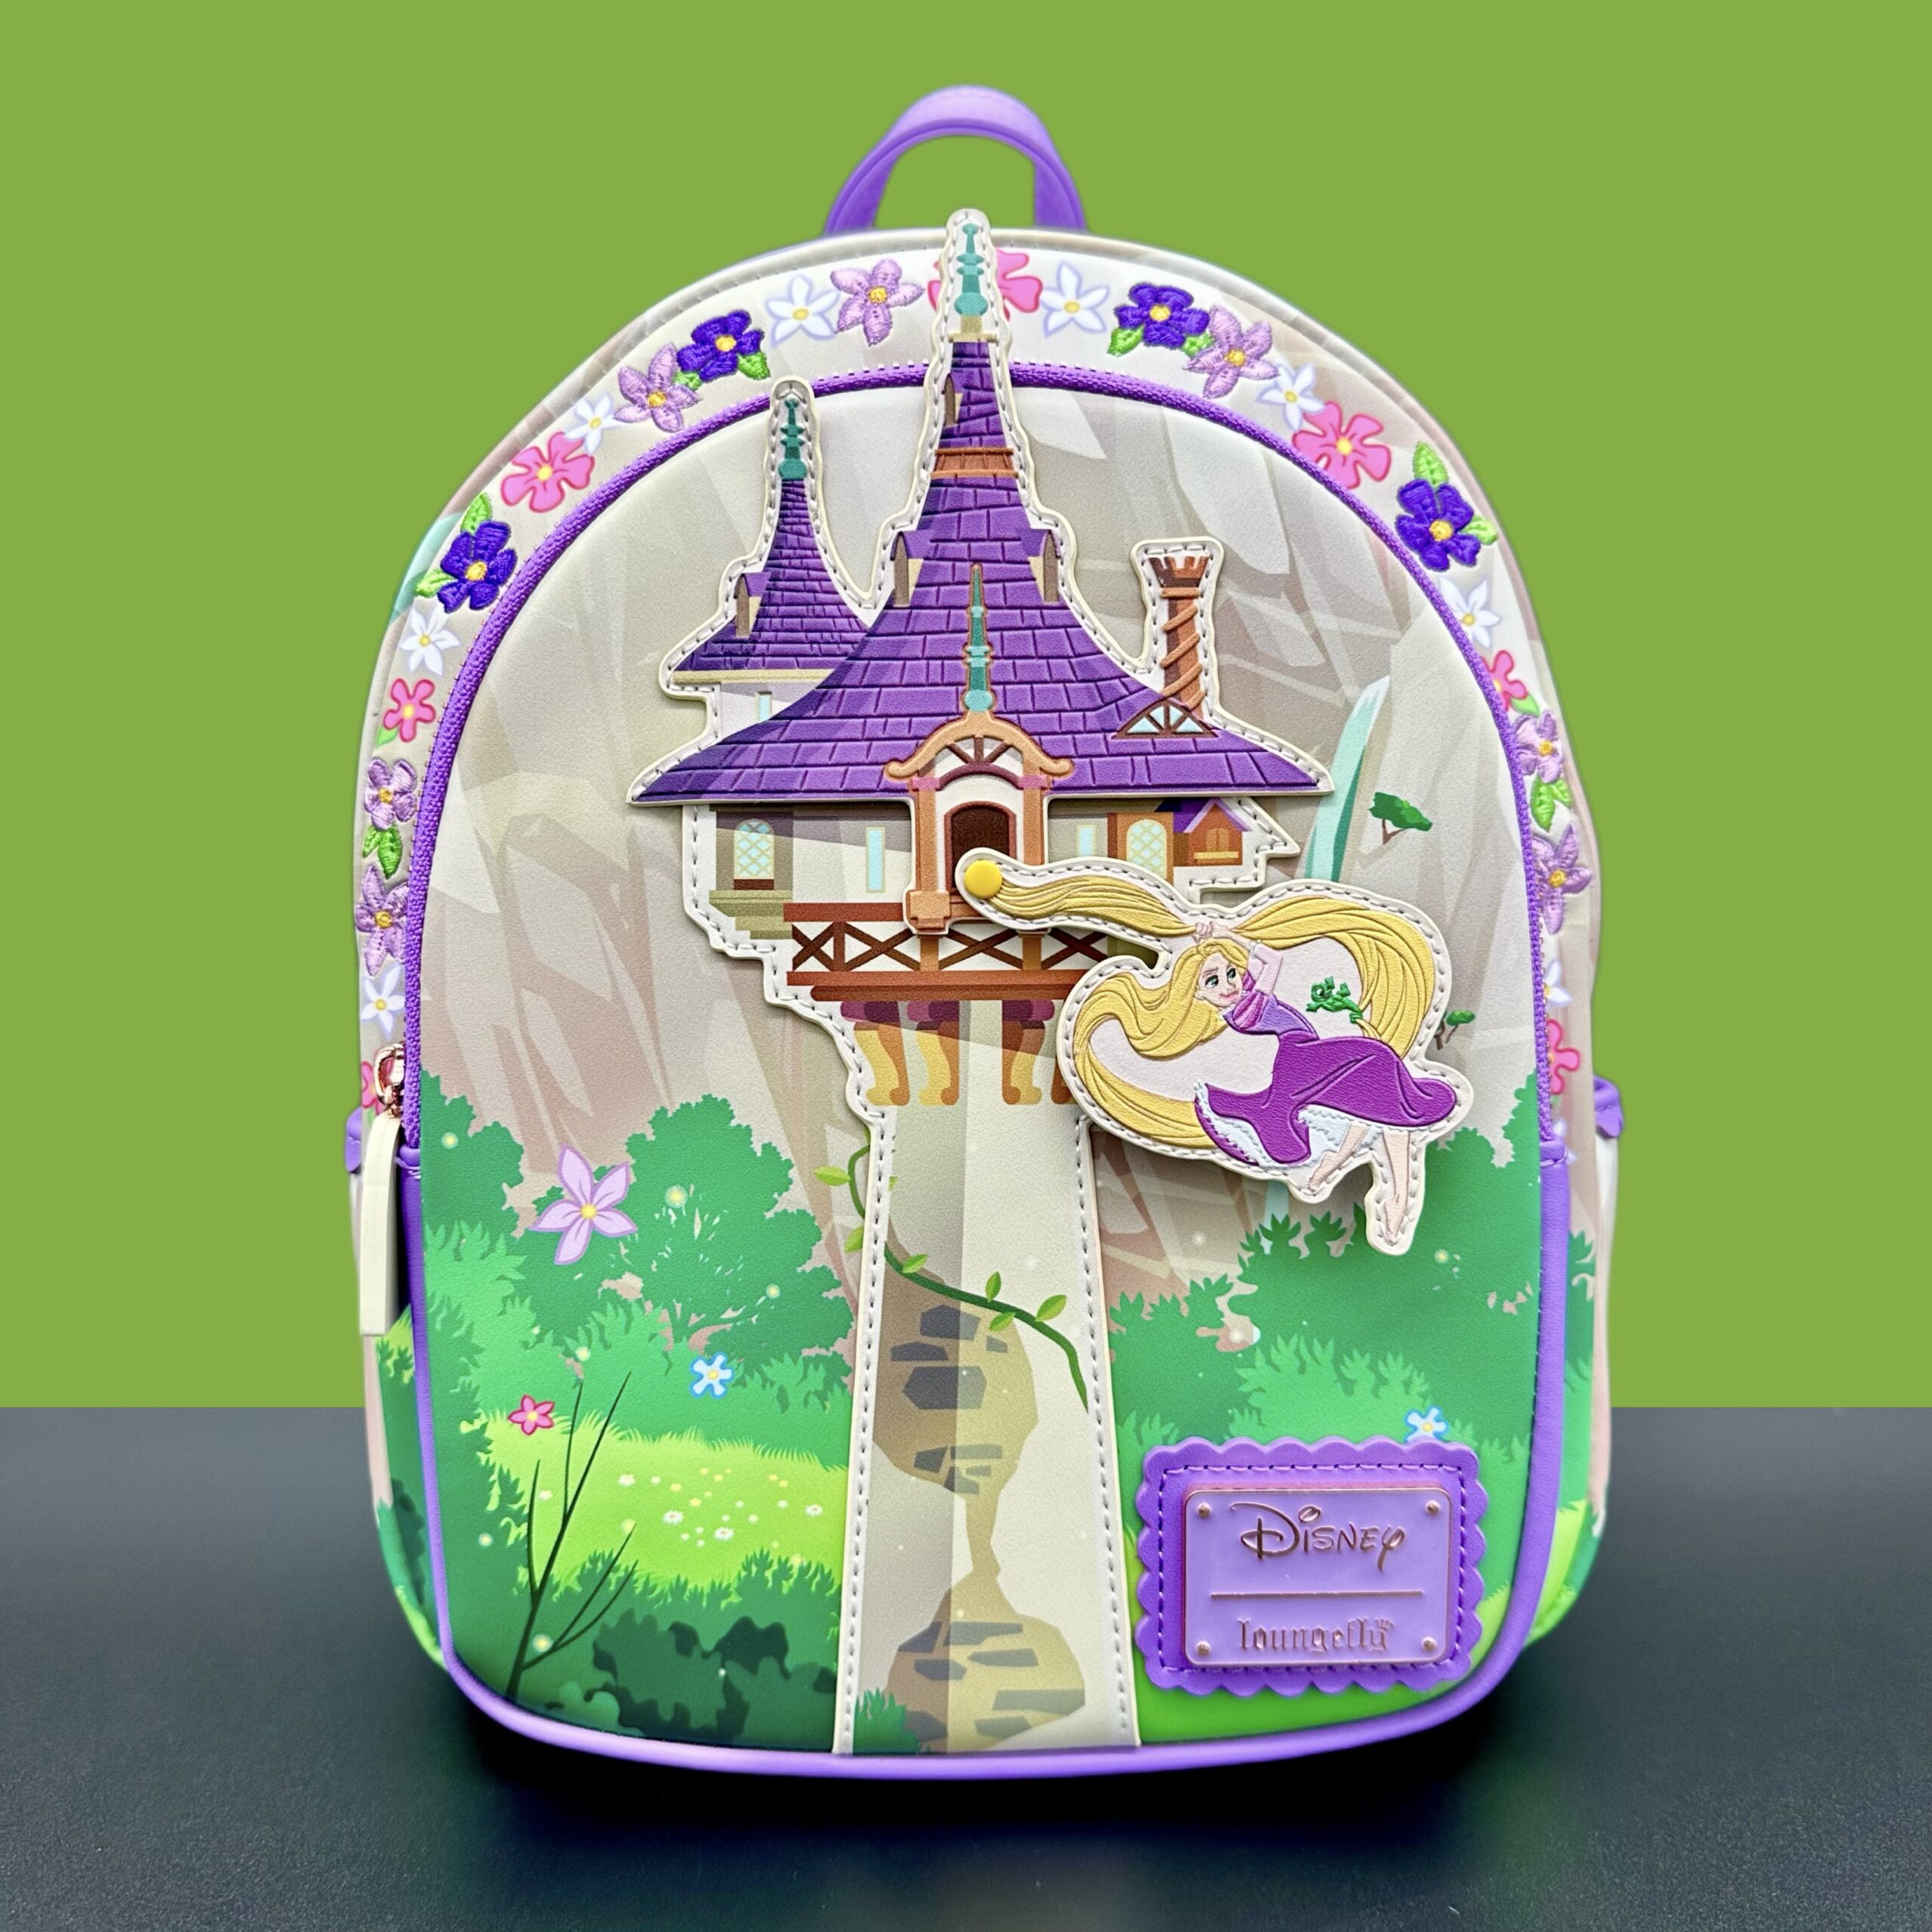 DISNEY TANGLED RAPUNZEL SWINGING FROM TOWER MINI BACKPACK Loungefly